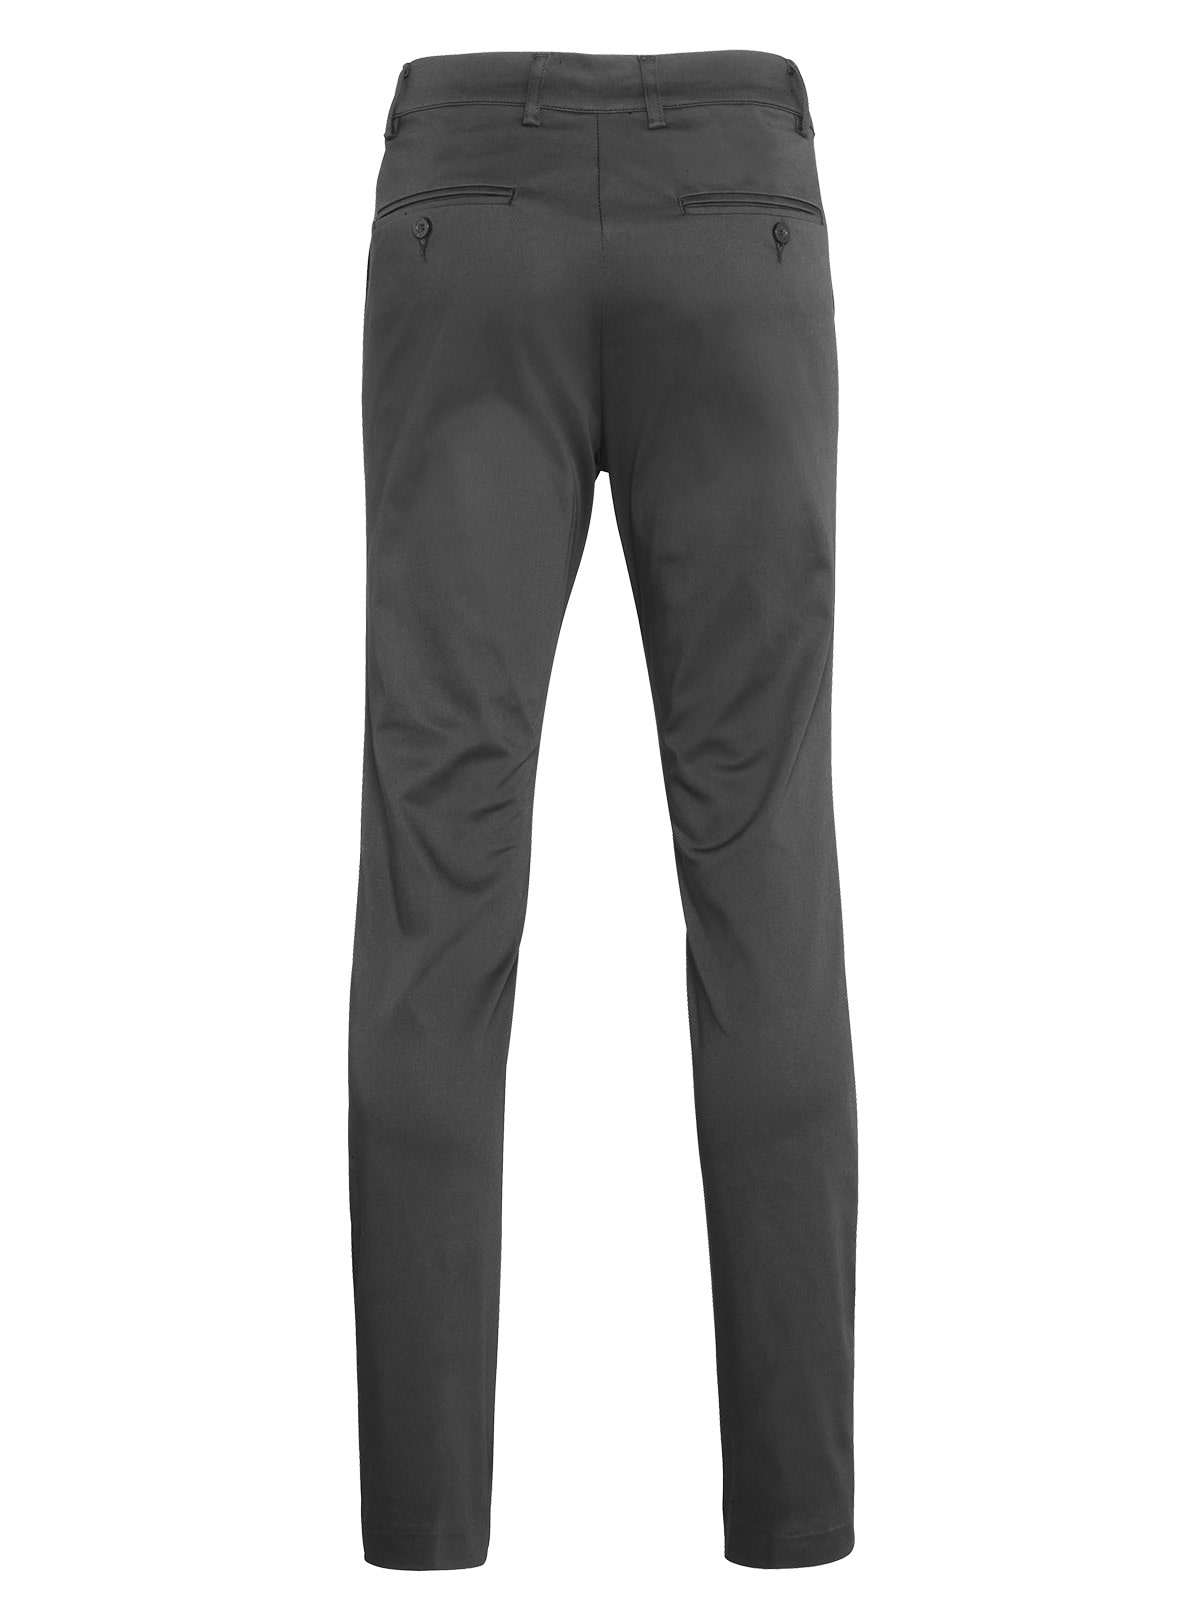 gray business trousers rear view